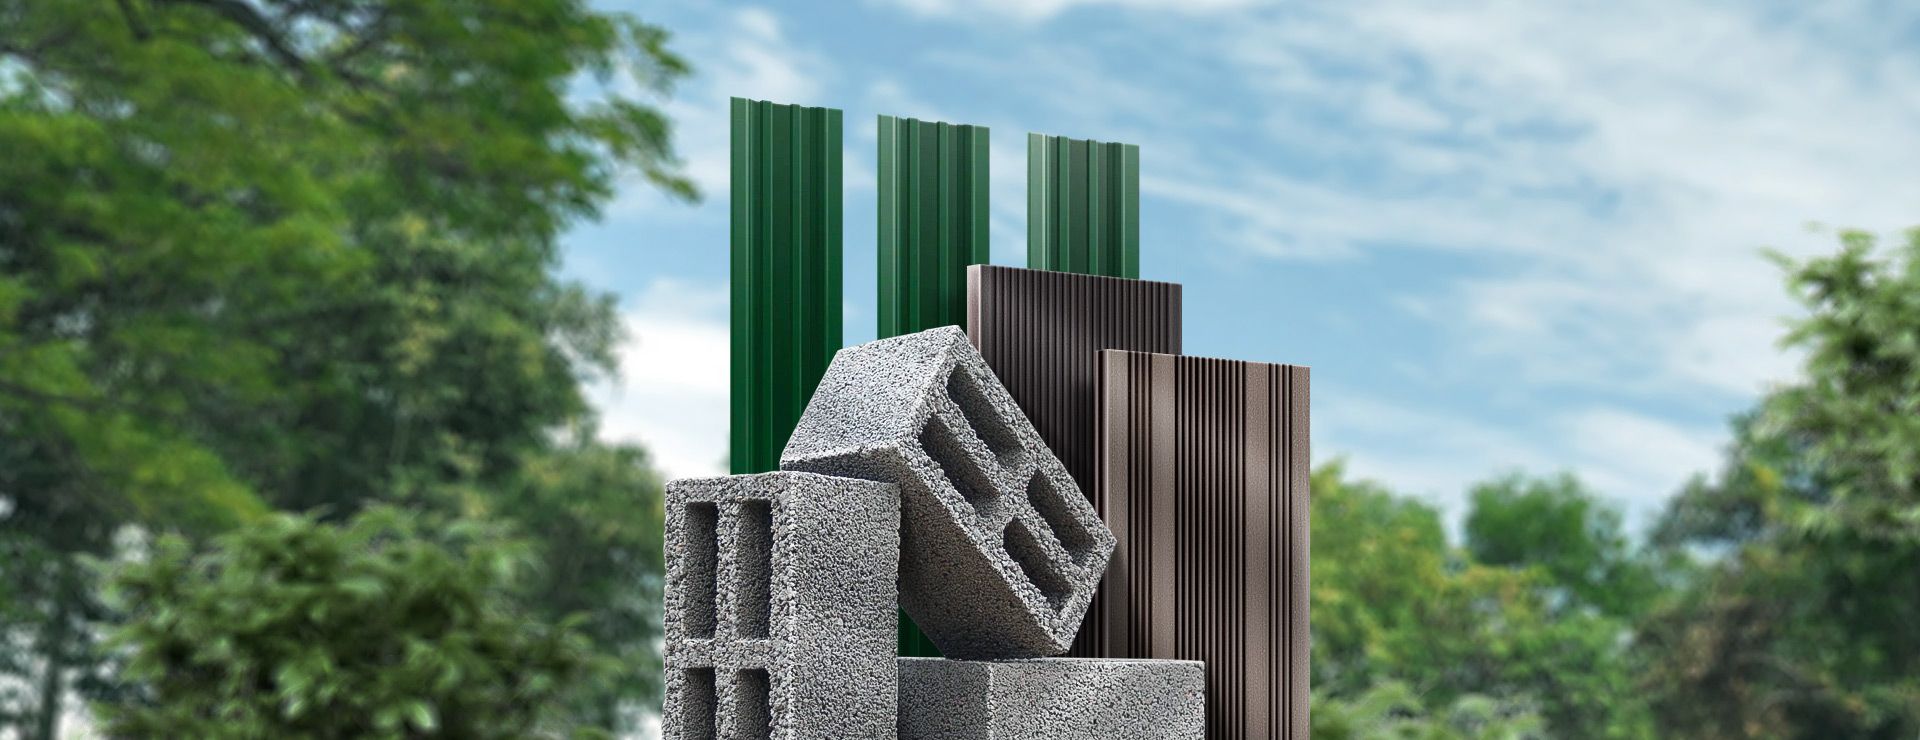 Arrival of building materials collection 2020